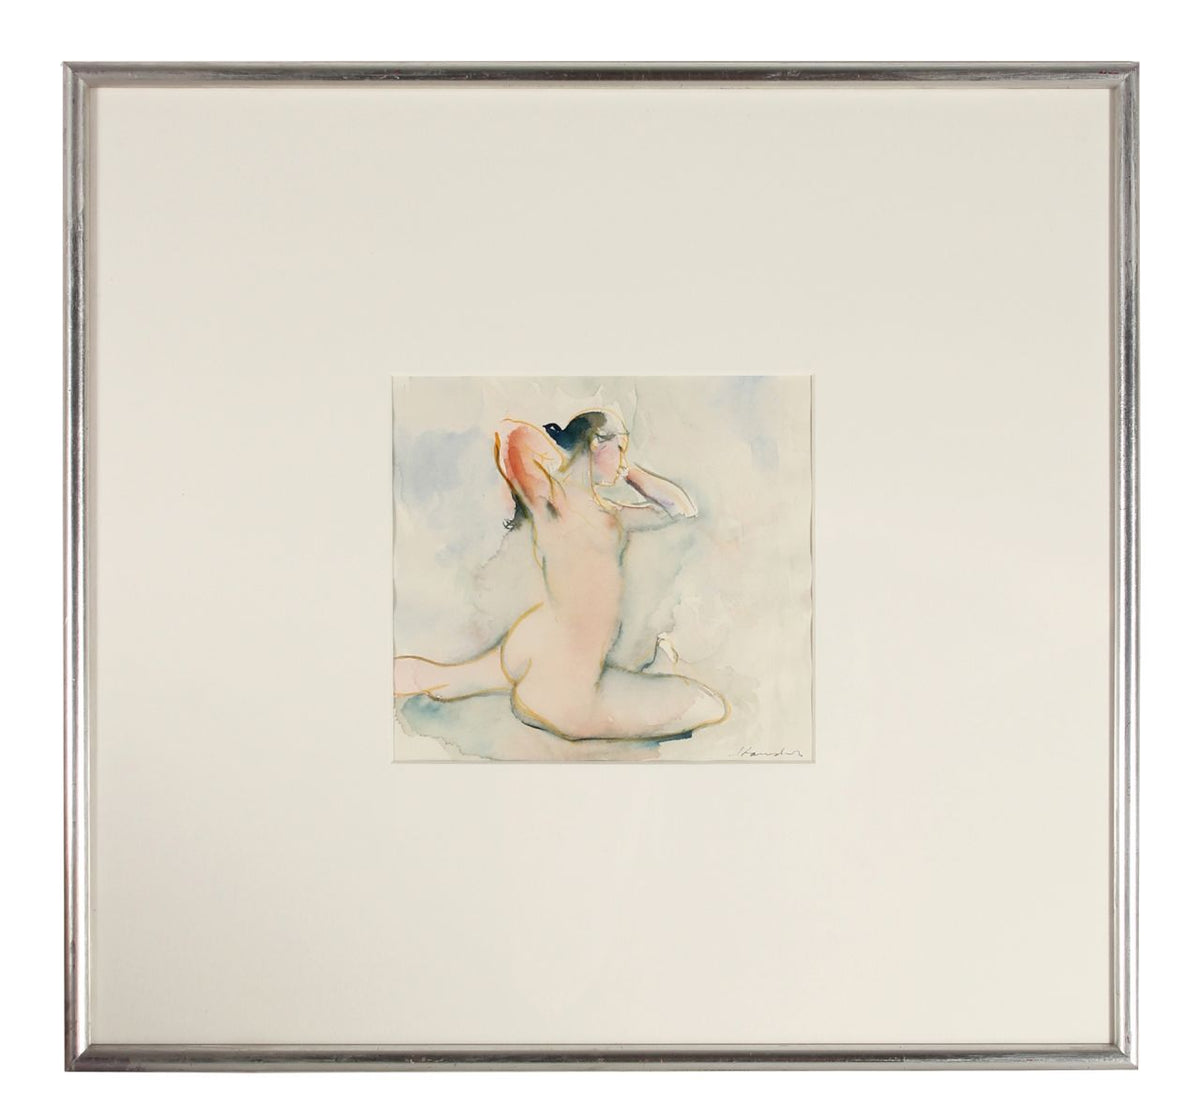 Seated Female Nude &lt;br&gt;20th Century Watercolor on Paper &lt;br&gt;&lt;br&gt;#71534